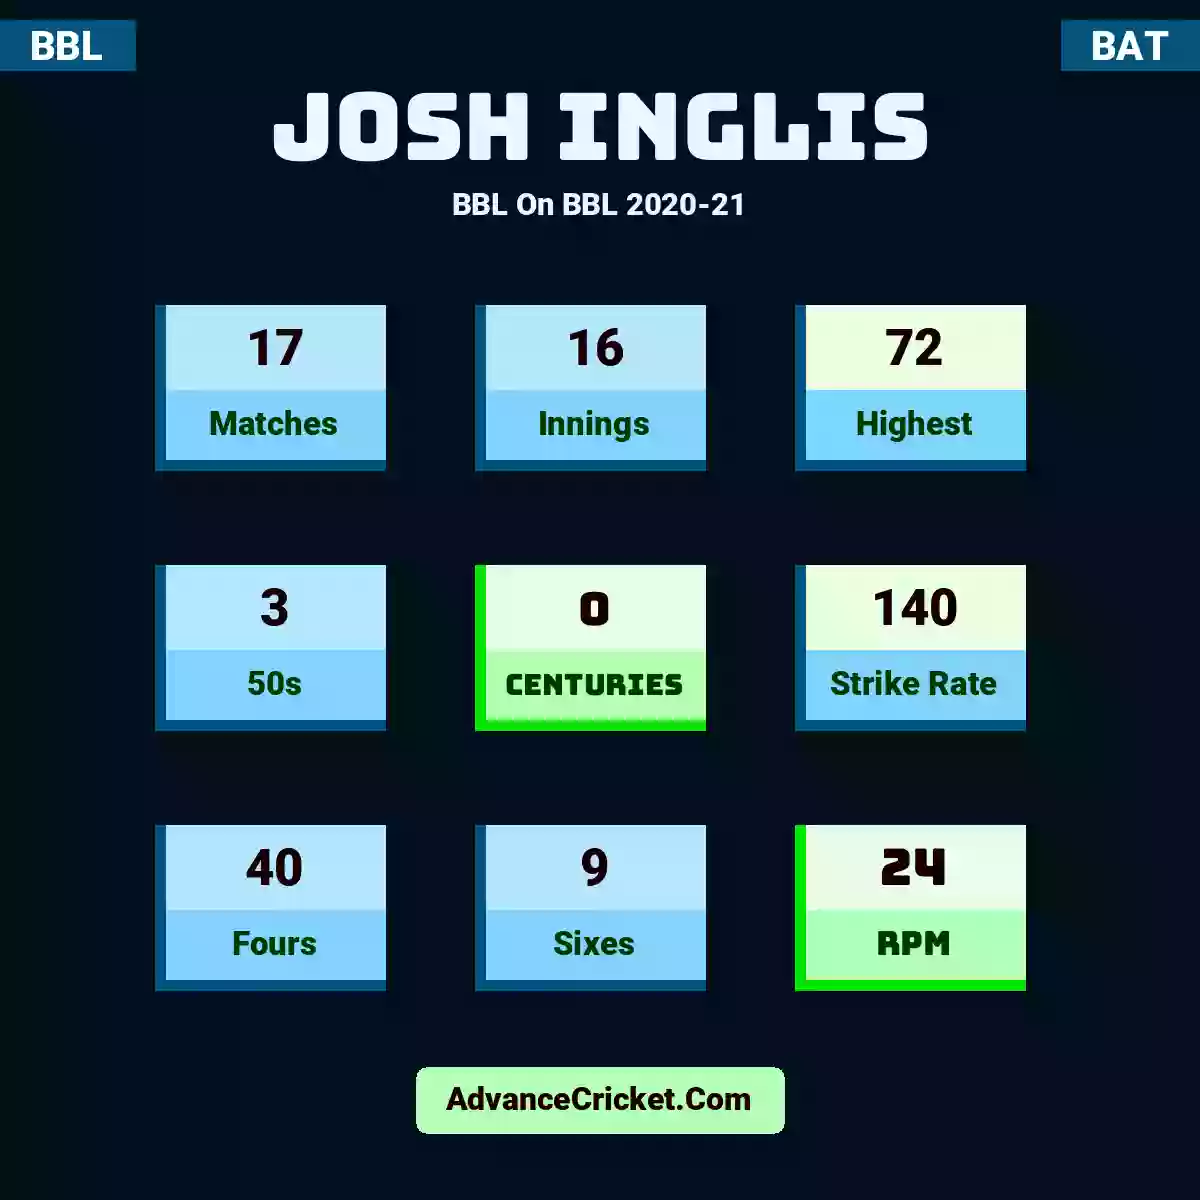 Josh Inglis BBL  On BBL 2020-21, Josh Inglis played 17 matches, scored 72 runs as highest, 3 half-centuries, and 0 centuries, with a strike rate of 140. J.Inglis hit 40 fours and 9 sixes, with an RPM of 24.